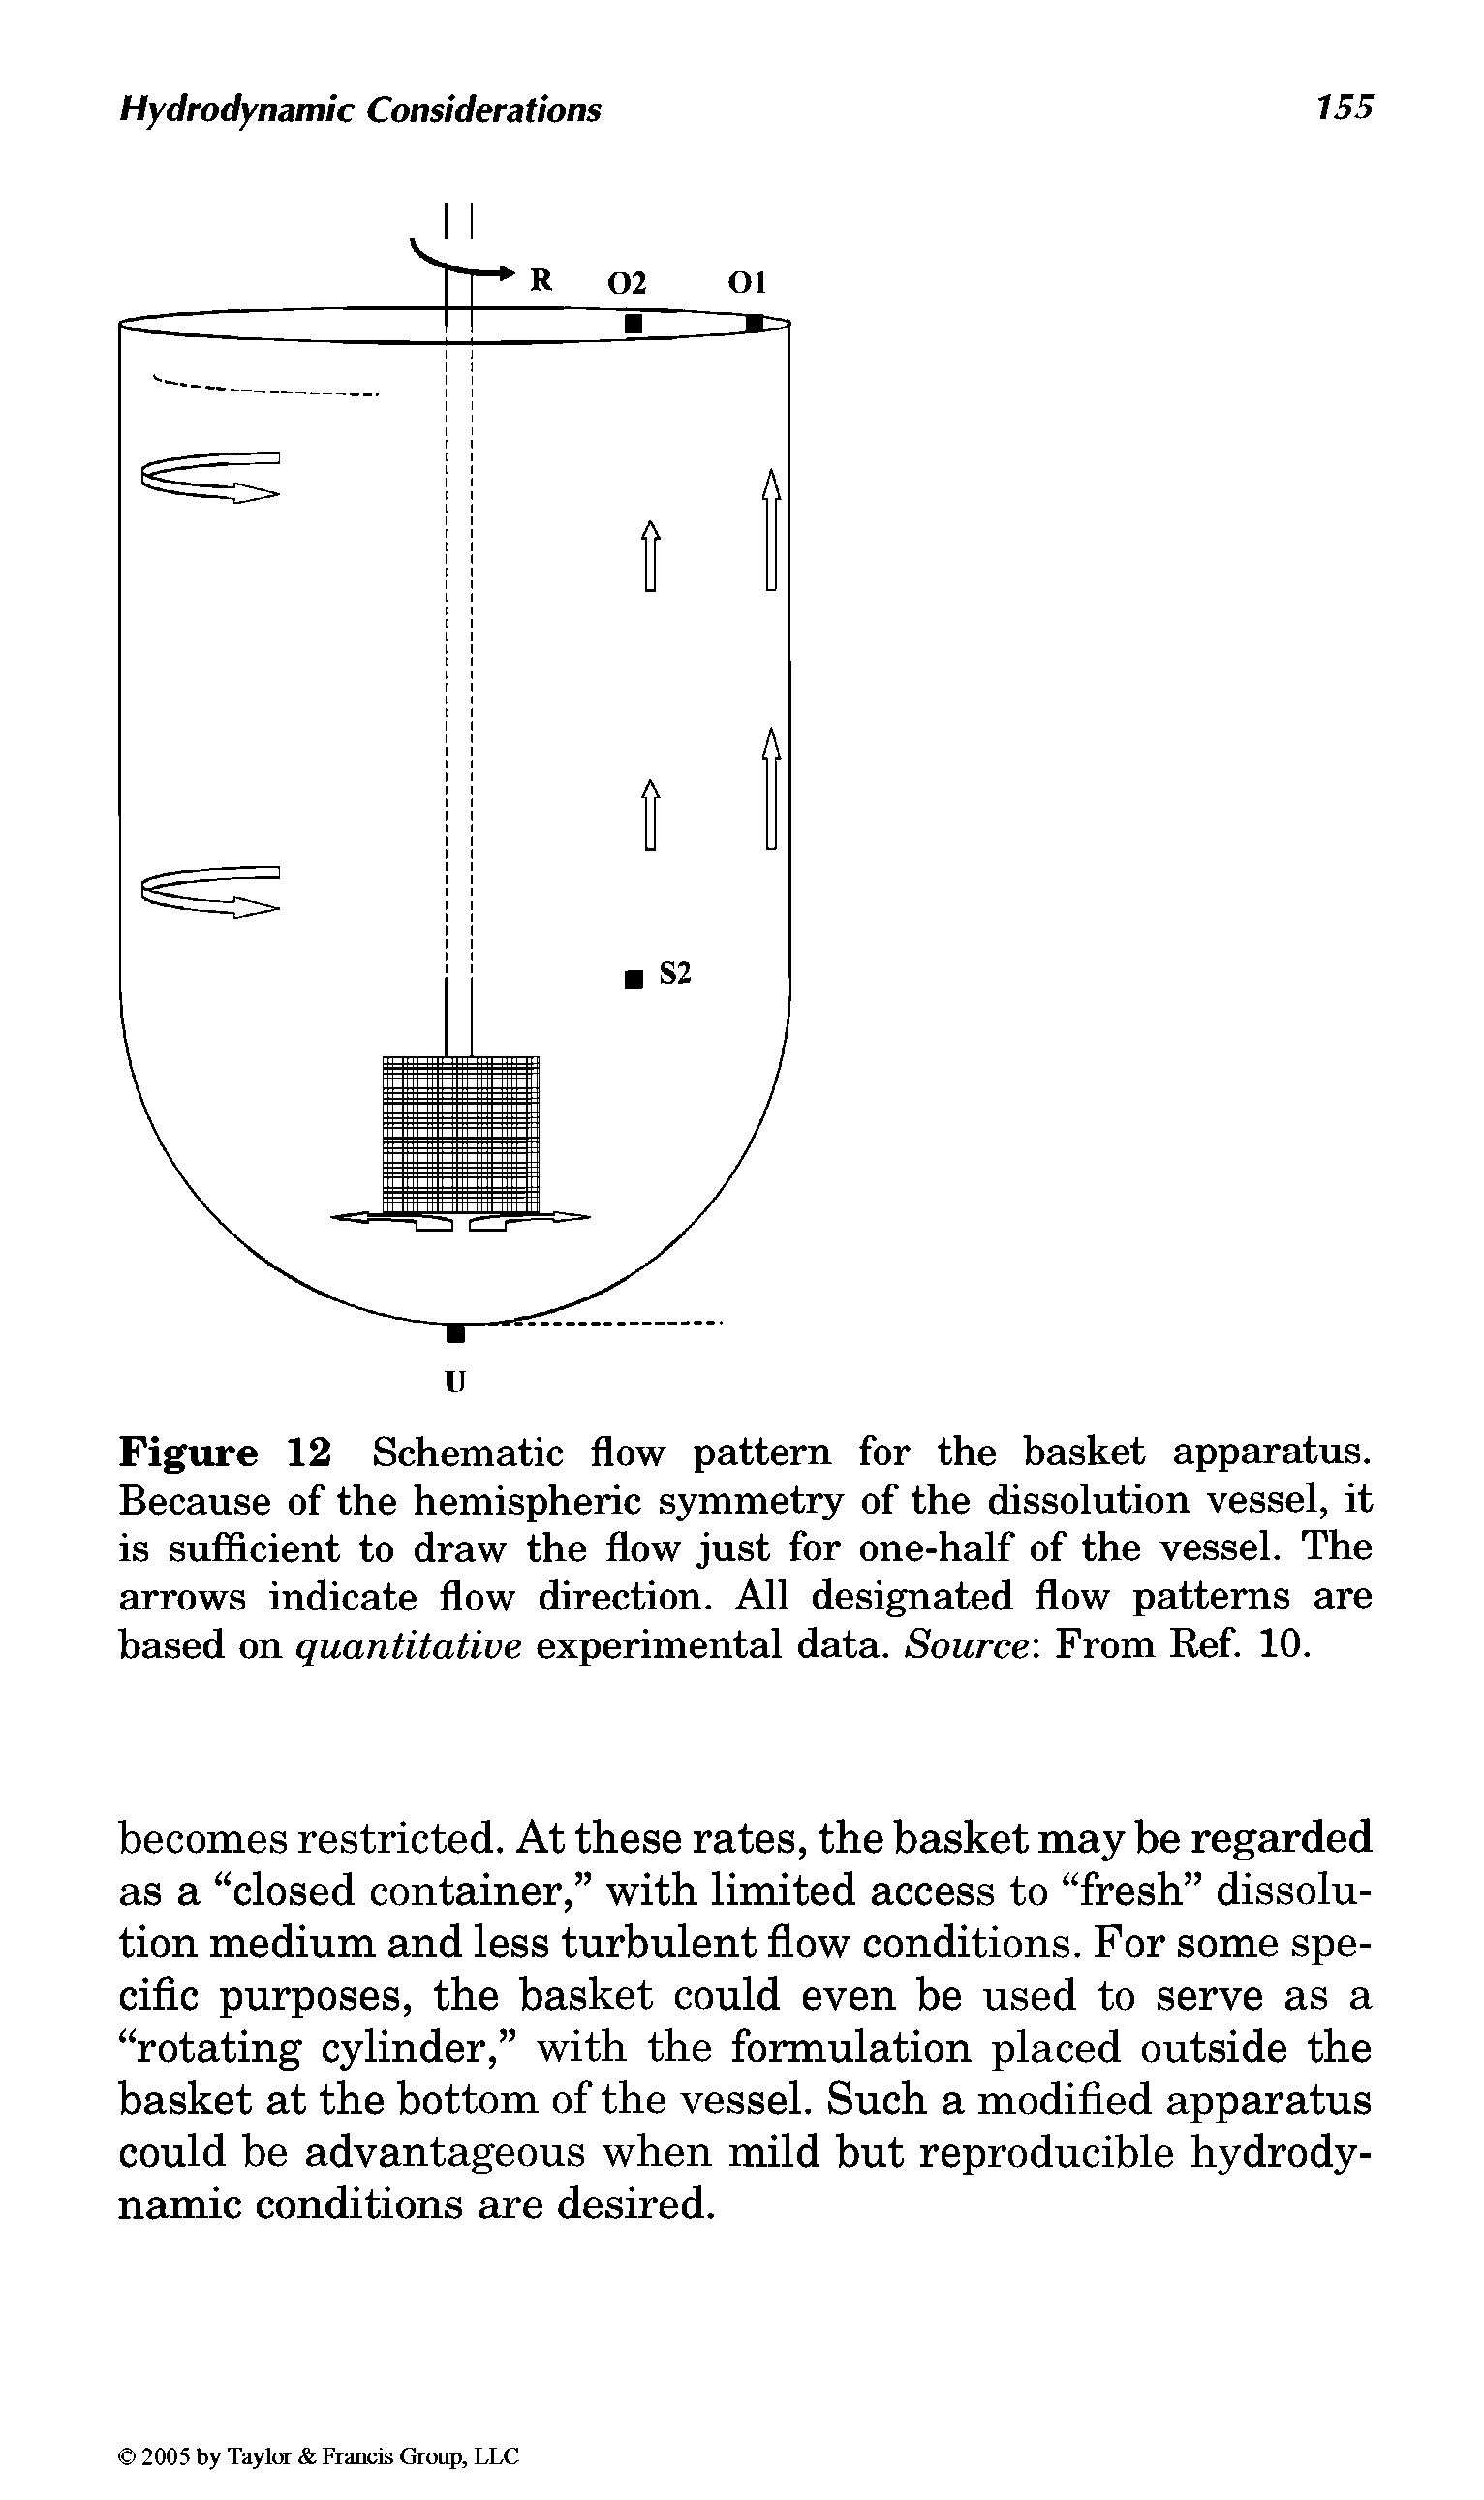 Figure 12 Schematic flow pattern for the basket apparatus. Because of the hemispheric symmetry of the dissolution vessel, it is sufficient to draw the flow just for one-half of the vessel. The arrows indicate flow direction. All designated flow patterns are based on quantitative experimental data. Source From Ref. 10.